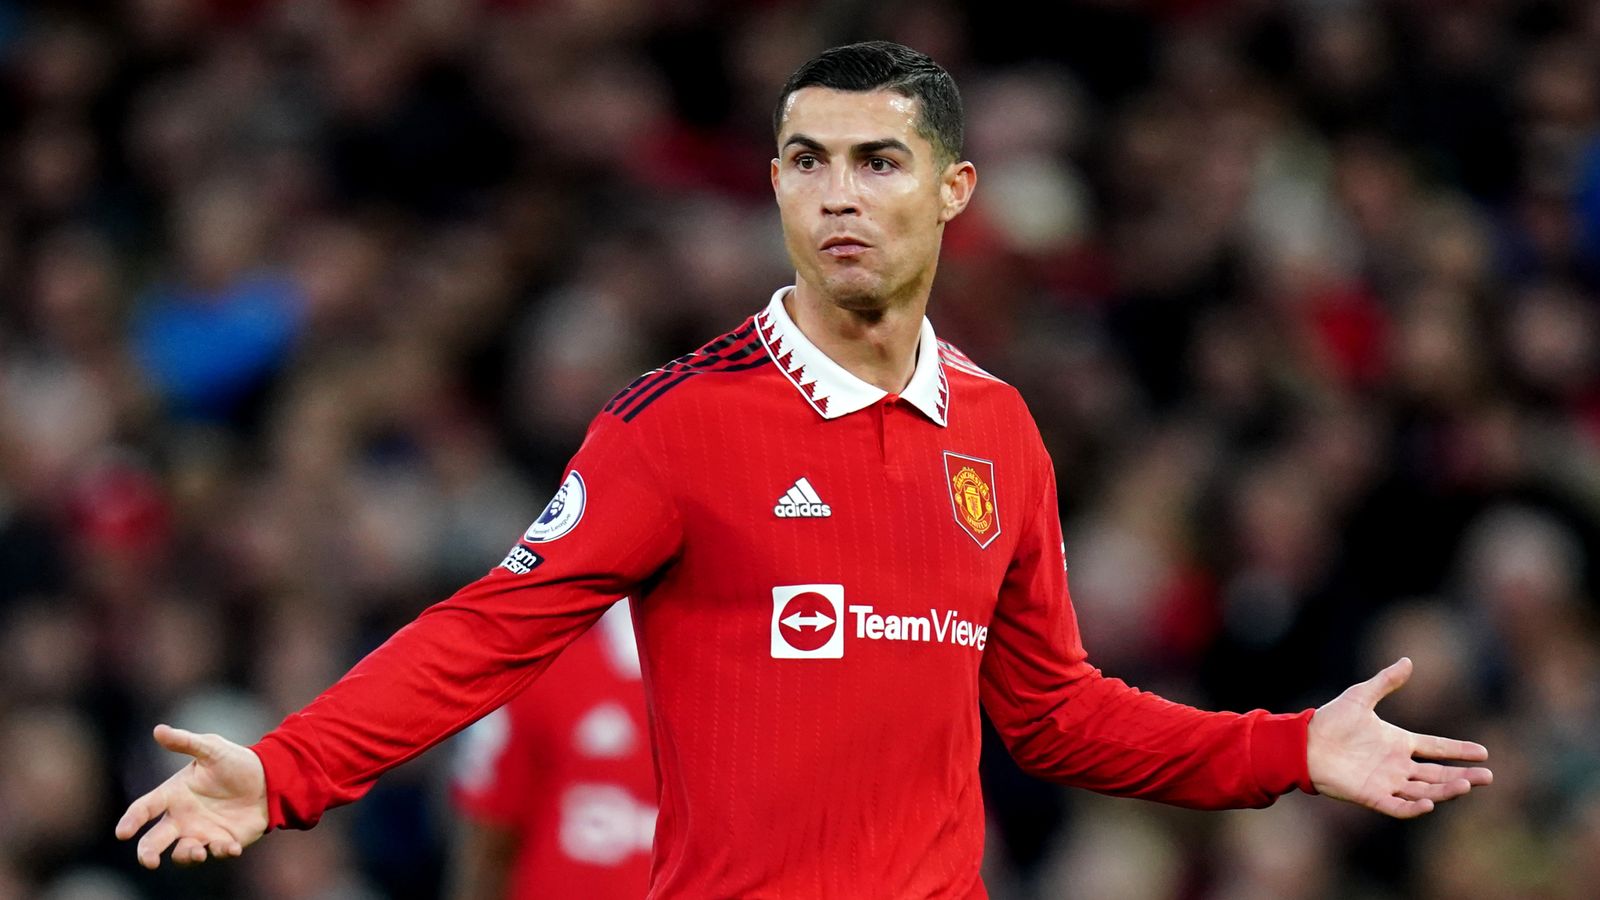 Manchester United exploring ways to end Cristiano Ronaldo's time at club following explosive interview